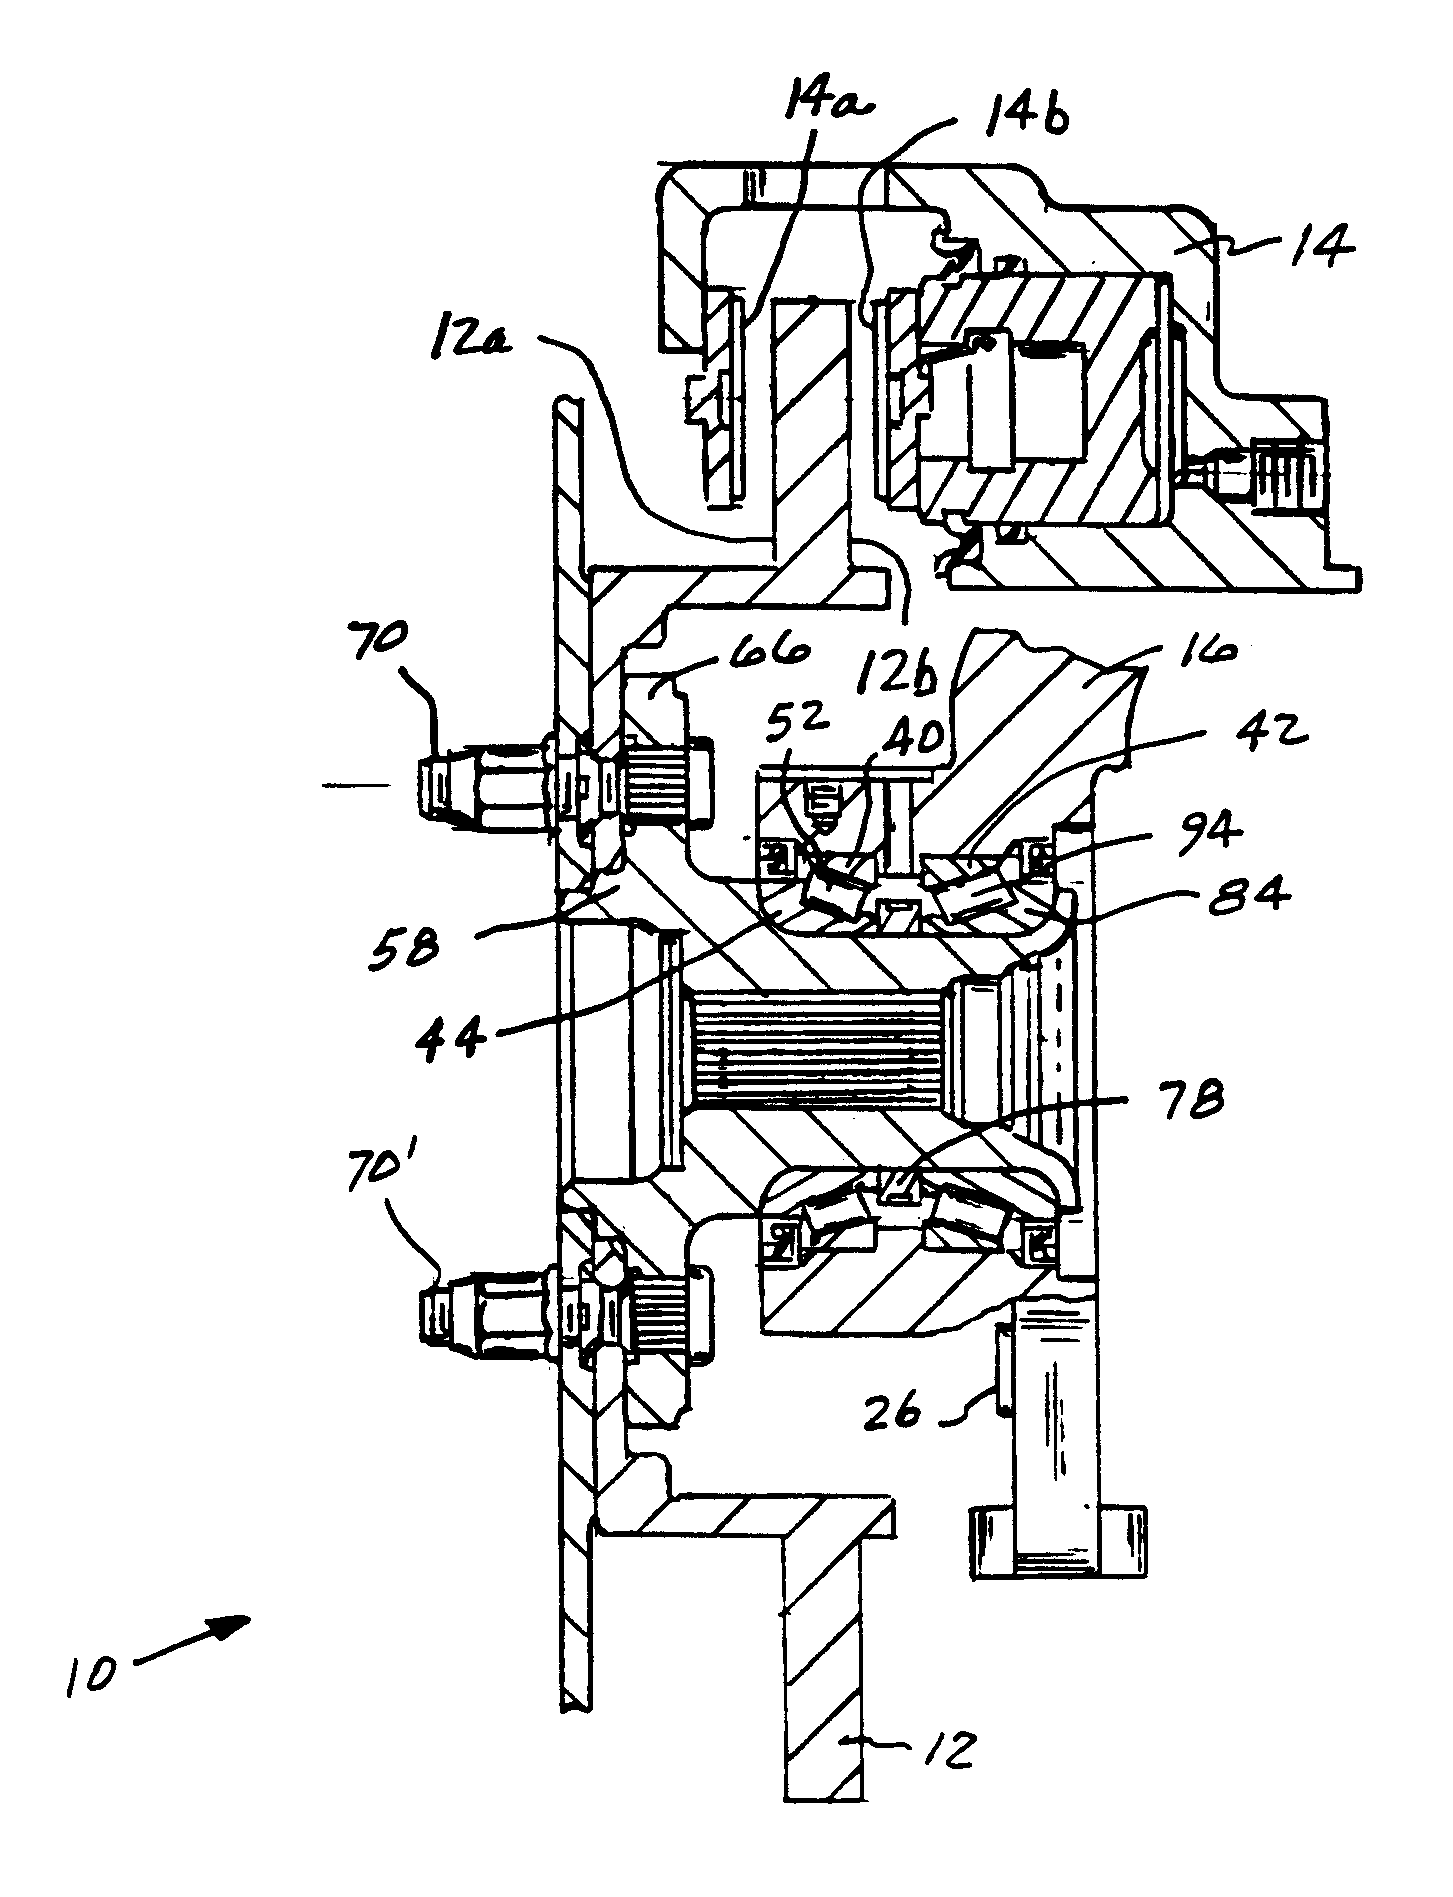 Method of manufacturing a modular corner assembly